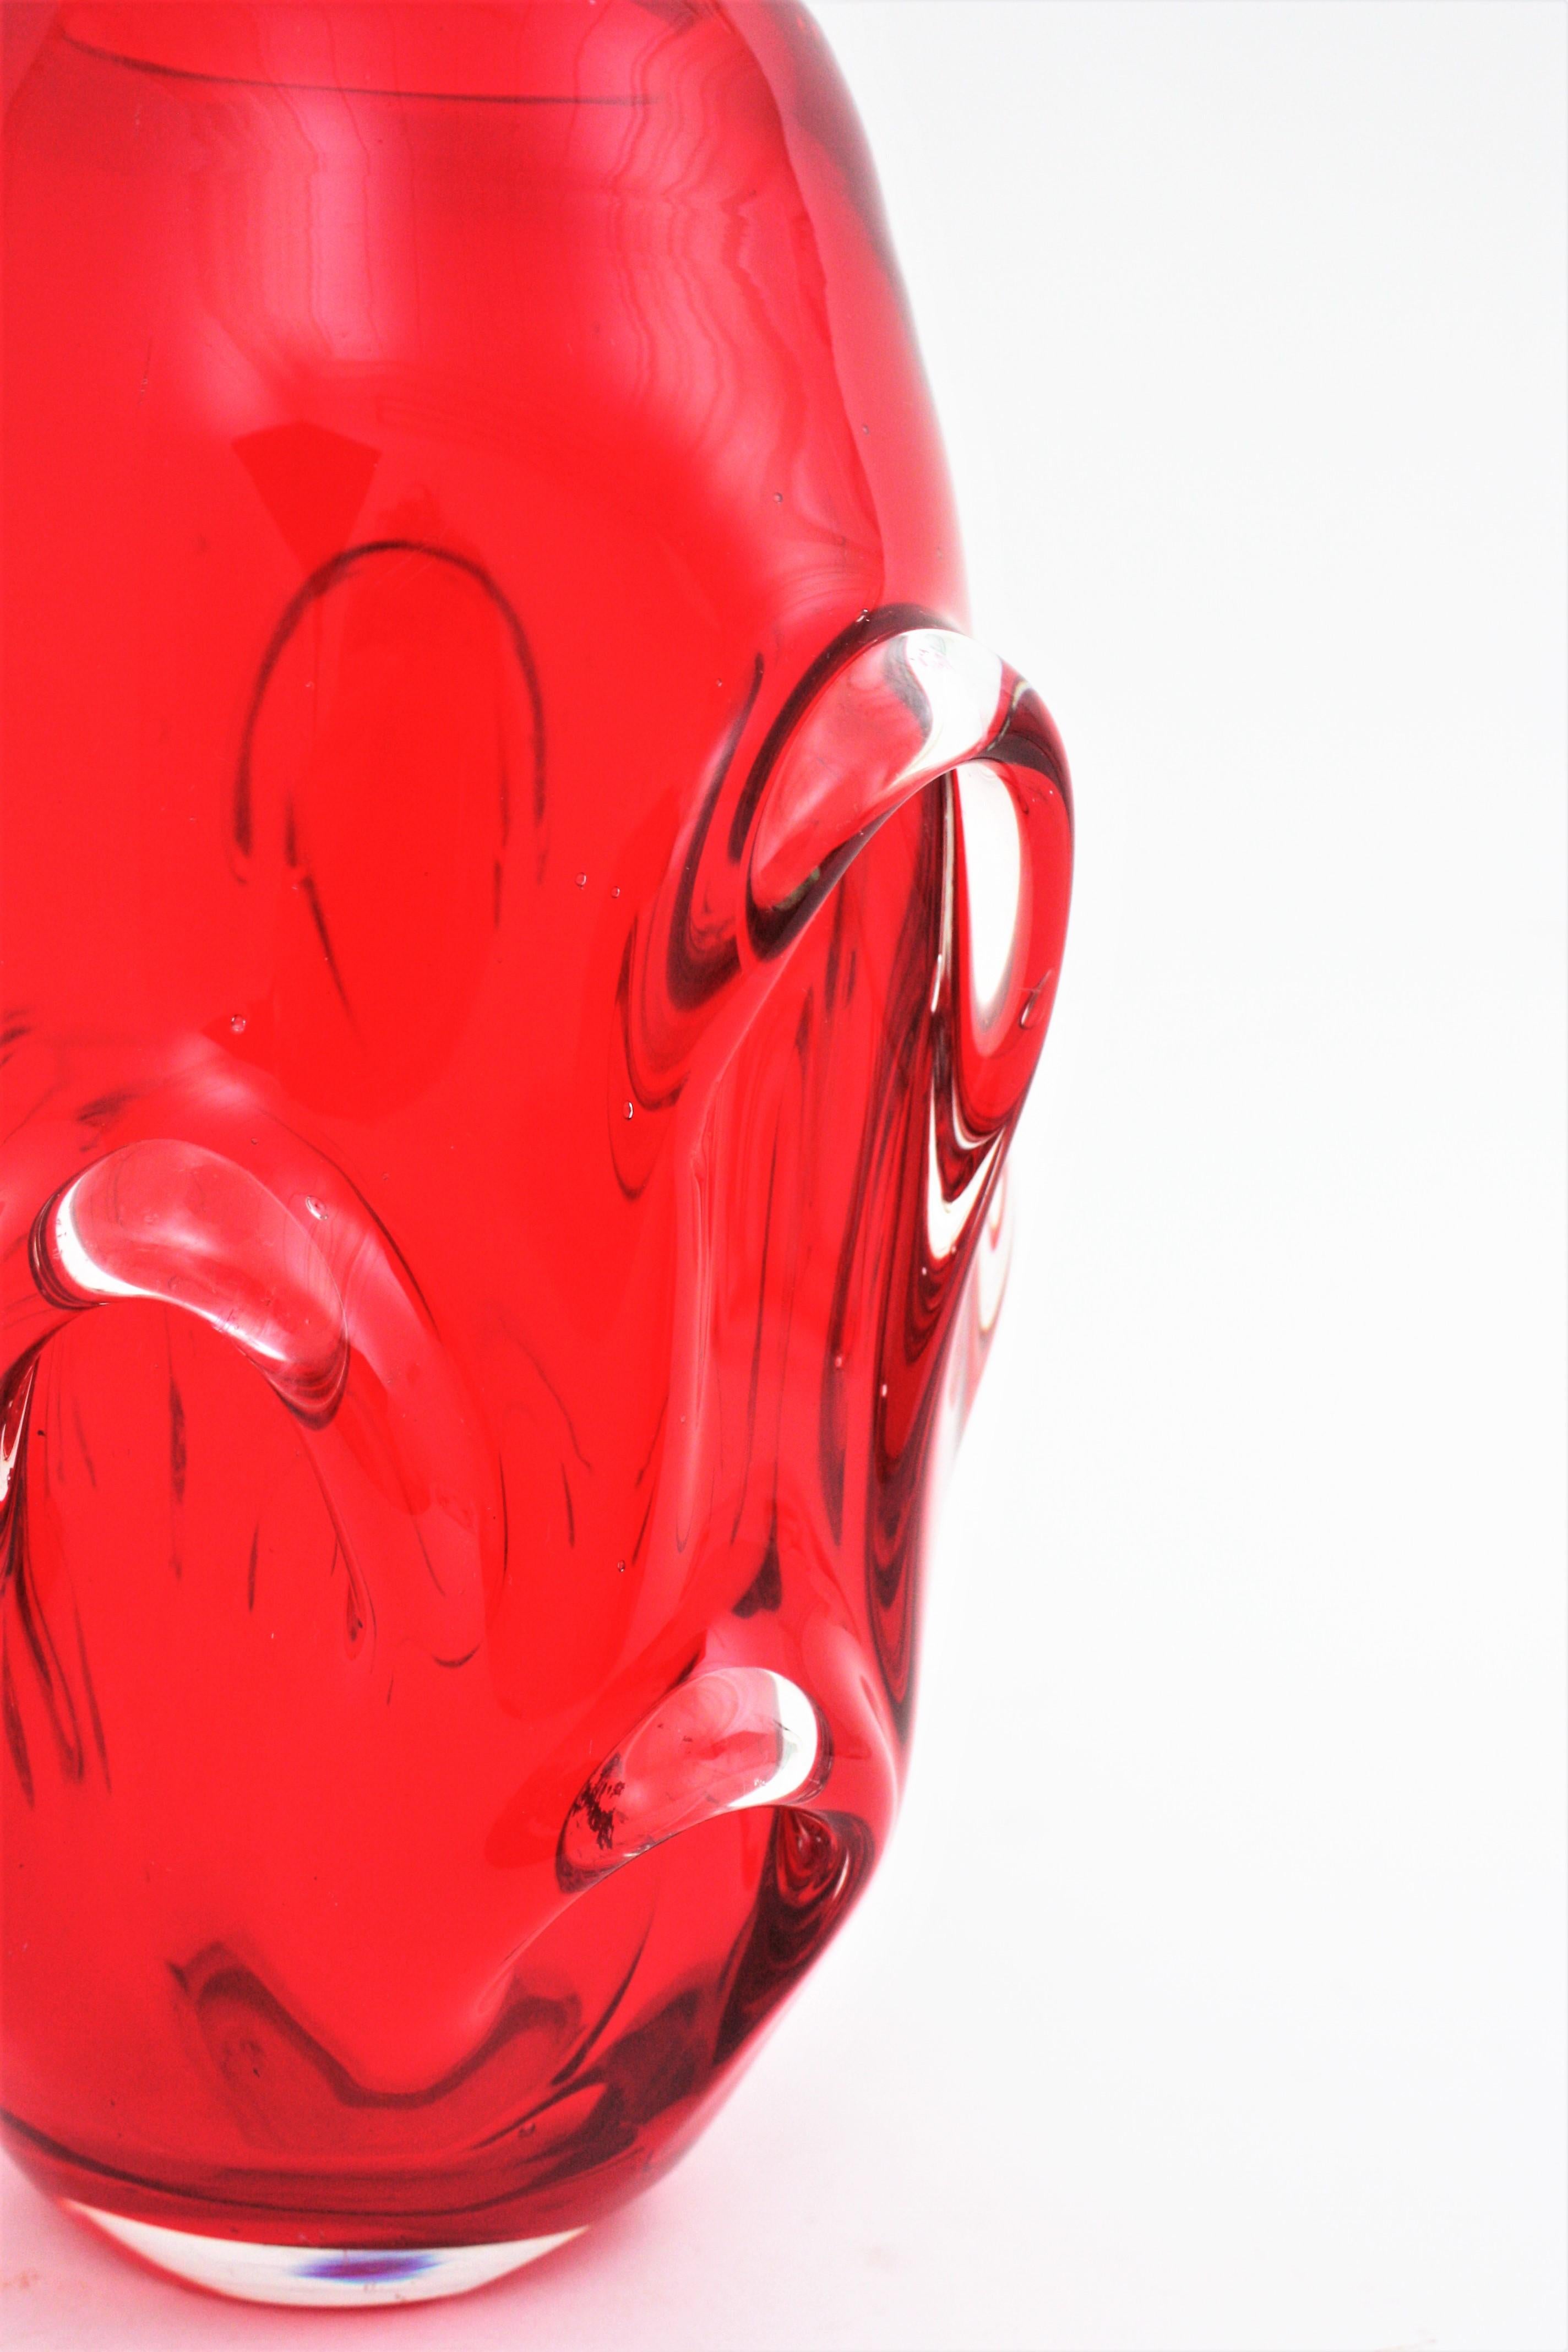 Archimede Seguso Murano Sommerso Red Art Glass Vase with Pulled Details For Sale 2